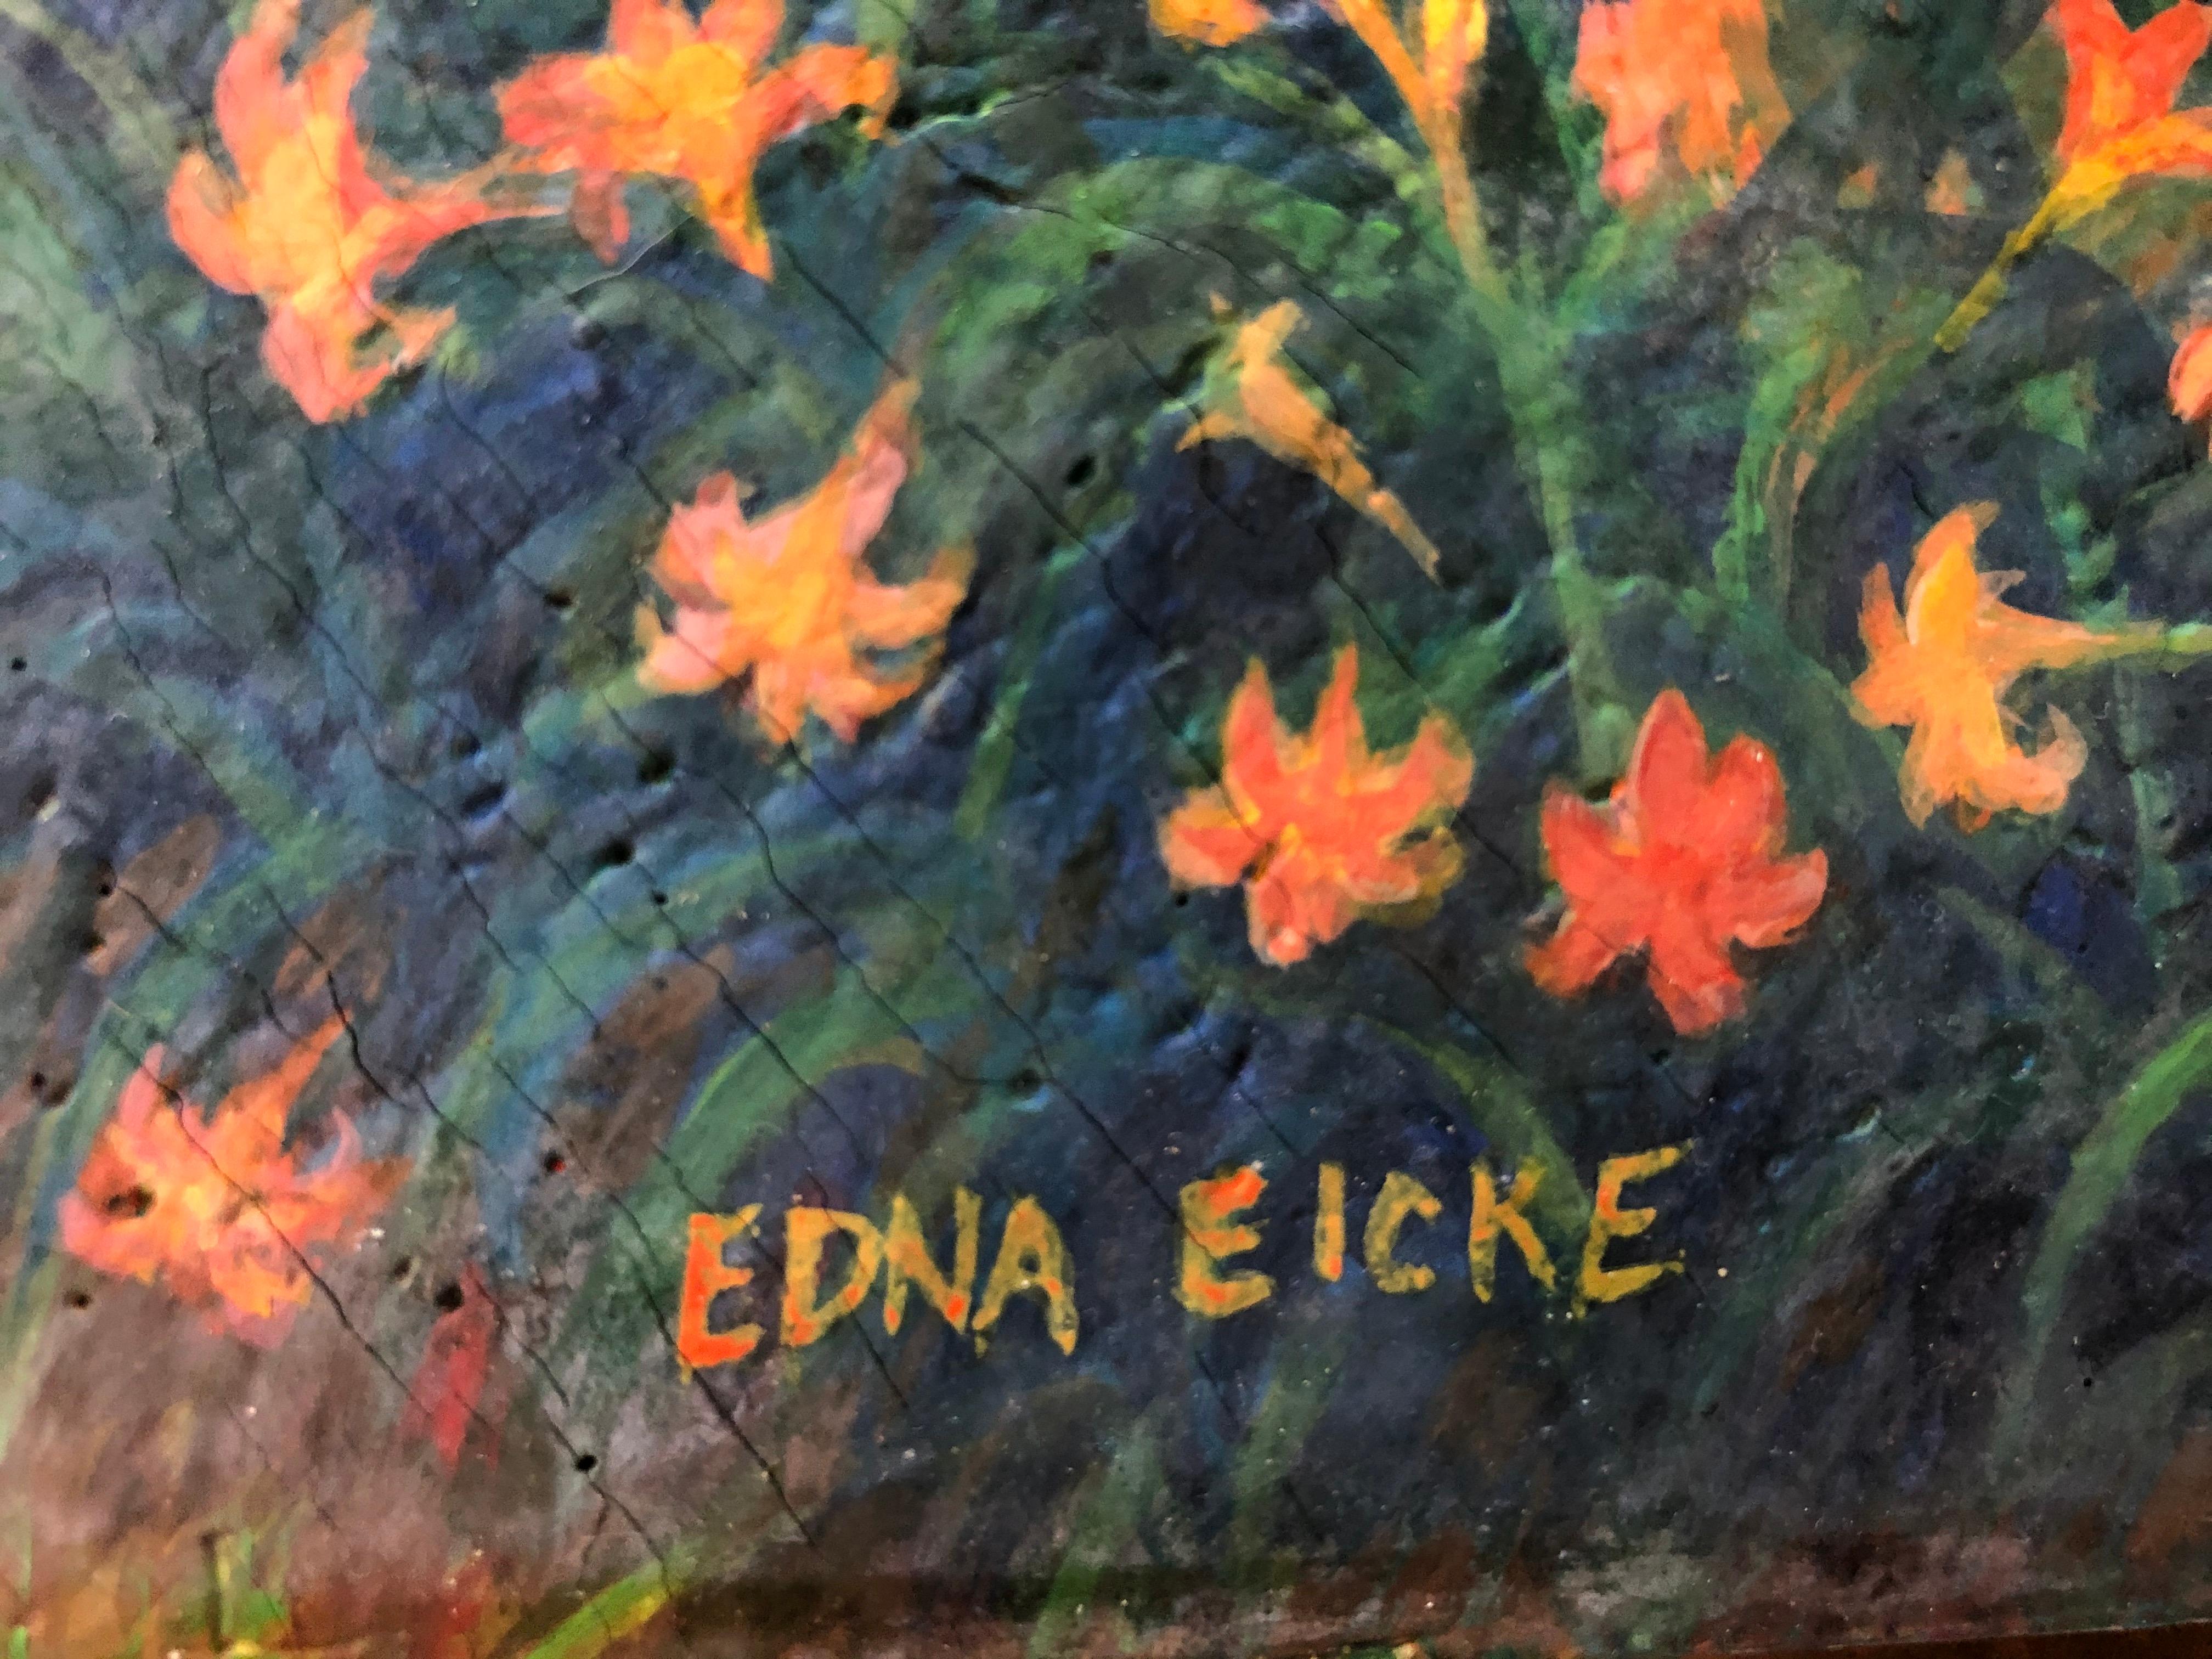 Edna Eicke: 1919-1979. Well listed American artist best known for her fabulous New Yorker magazine covers. From 1946-1961 she painted 51 New Yorker covers mostly focused on scenes of childhood such as this gem. This is most likely a tempera and or